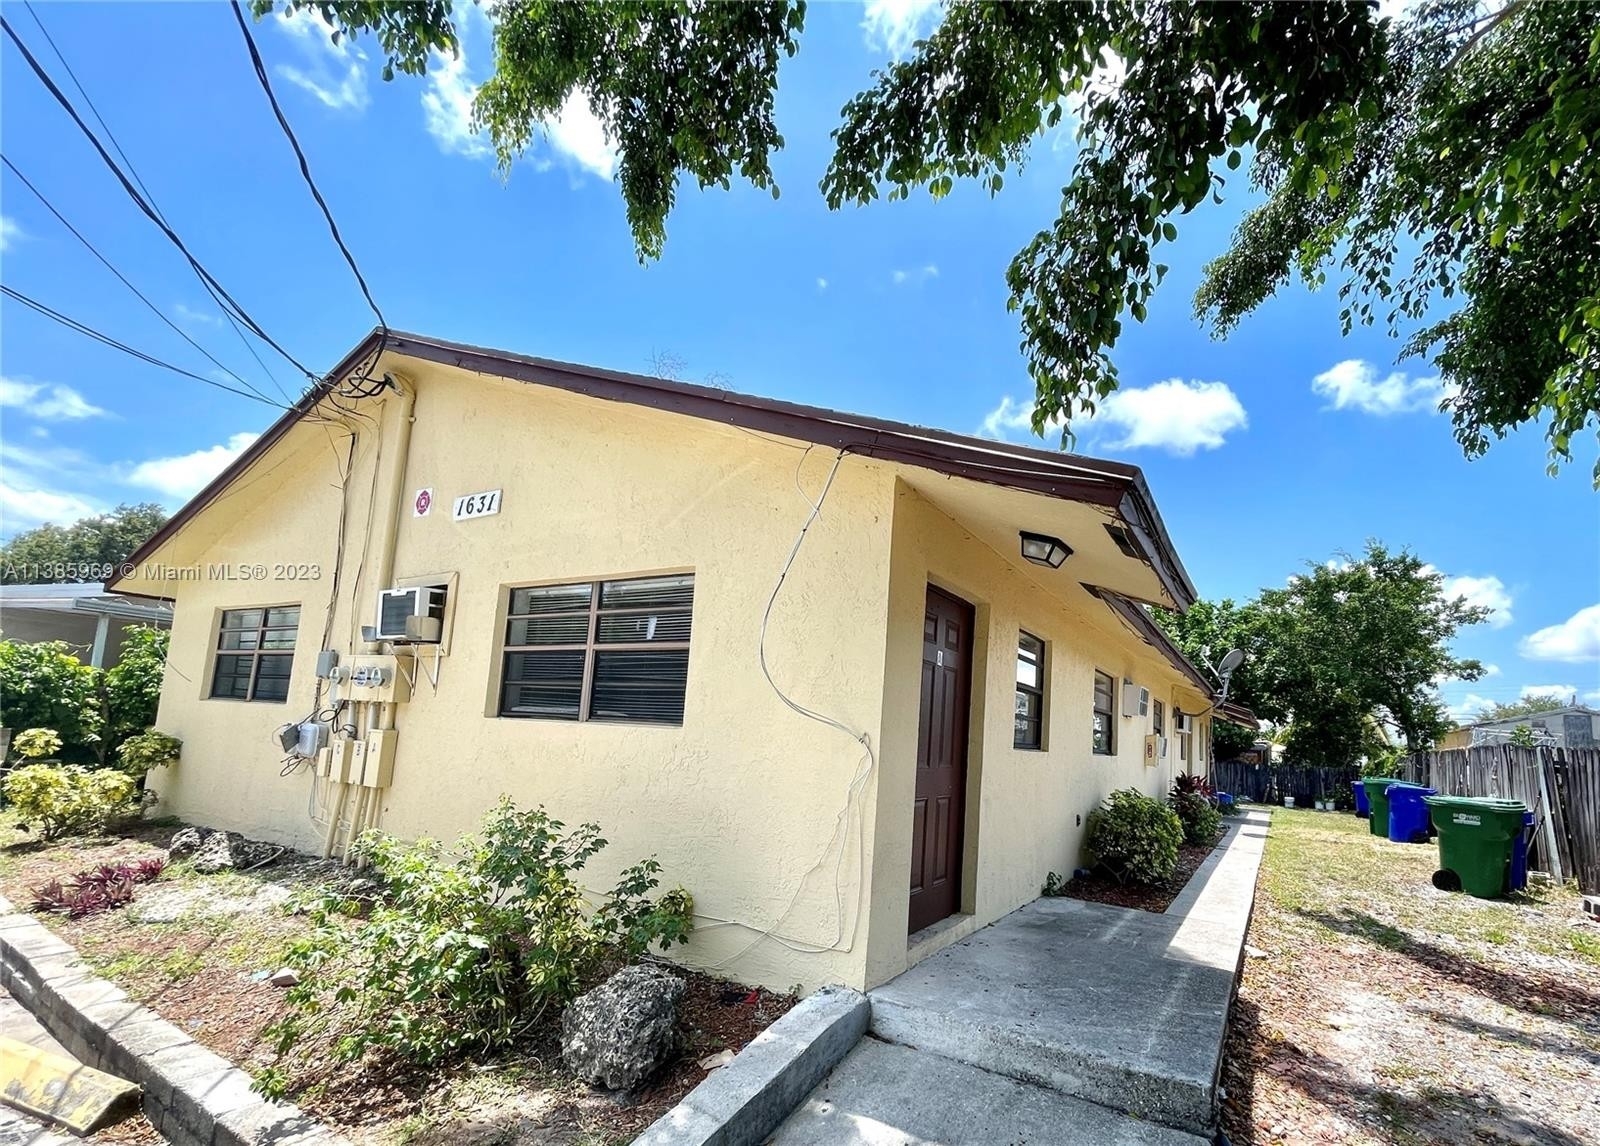 Rentals at 1631 SW 44th Ave, A Broadview Park, Fort Lauderdale, FL 33317